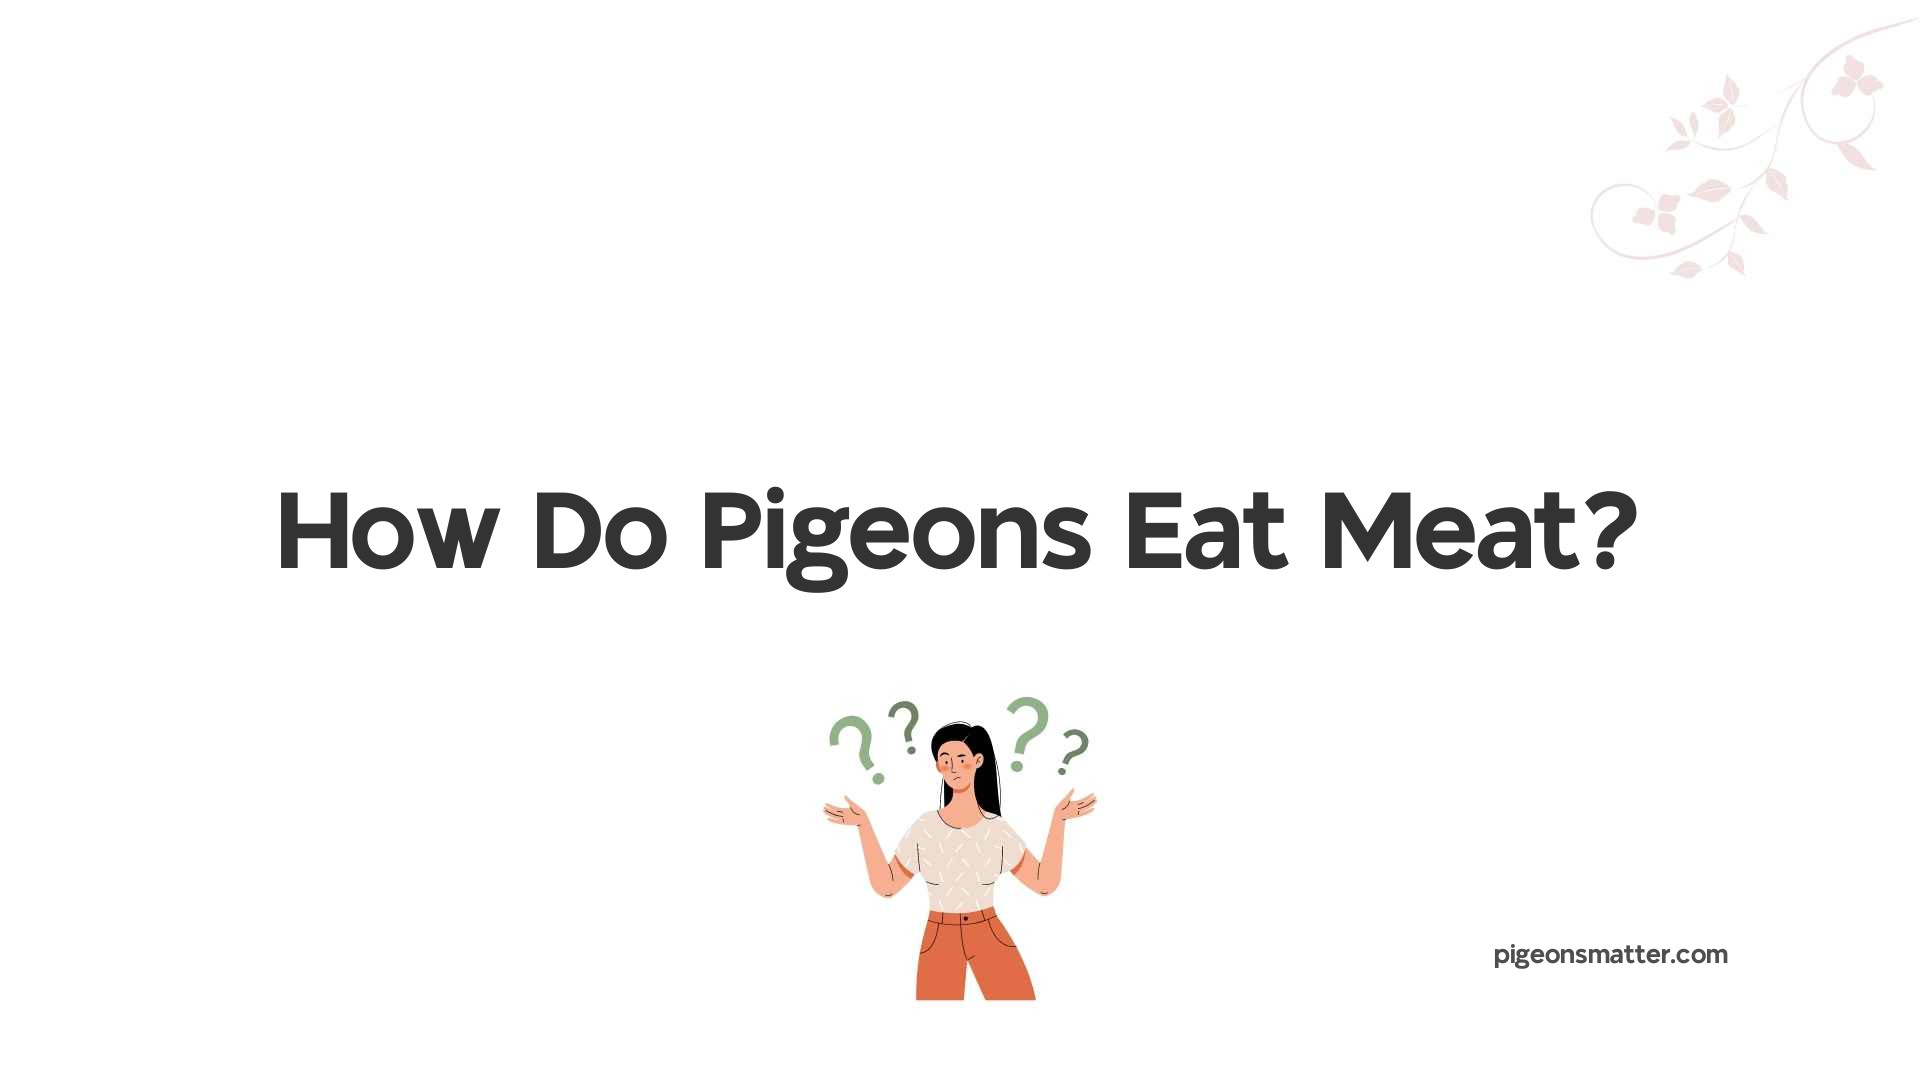 How Do Pigeons Eat Meat?